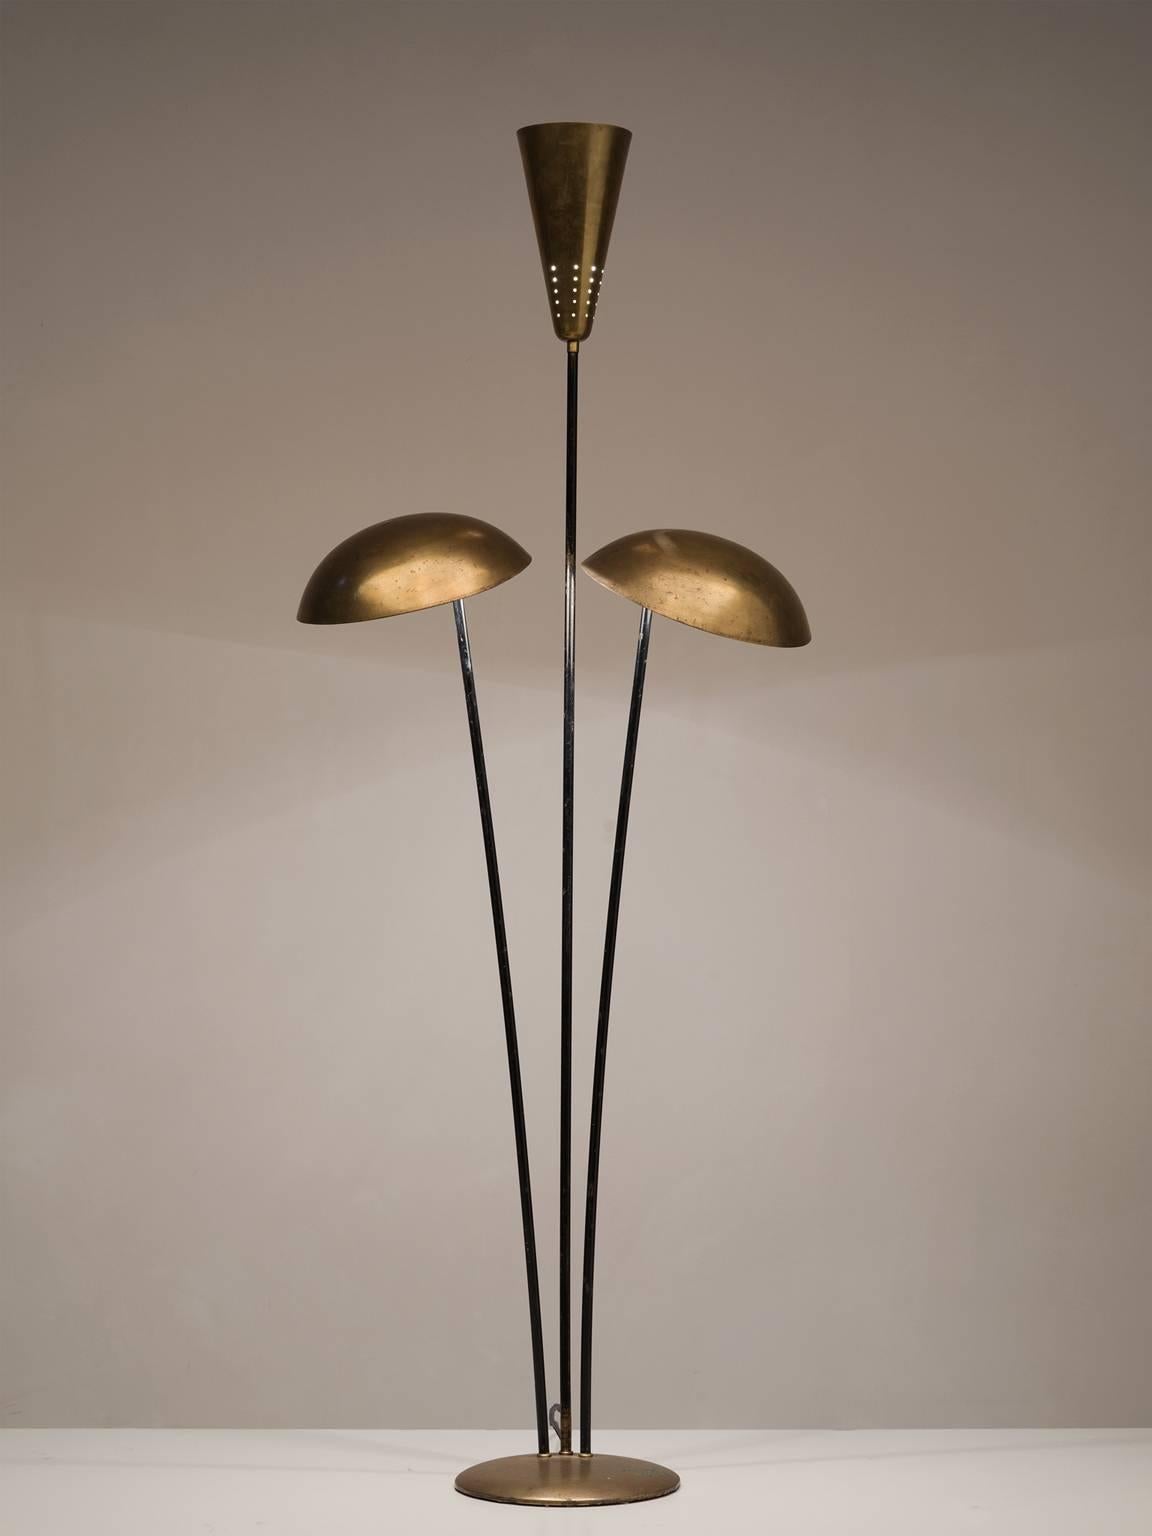 Hildegard Liertz for Hesse-Lamps, floor lamp in metal and brass,  Germany, 1970s. 

This playful floor lamp features three separate rods that lead to three brass lamp shades. The middle shade is cone shaped whereas the outer shades are bowl-shaped.